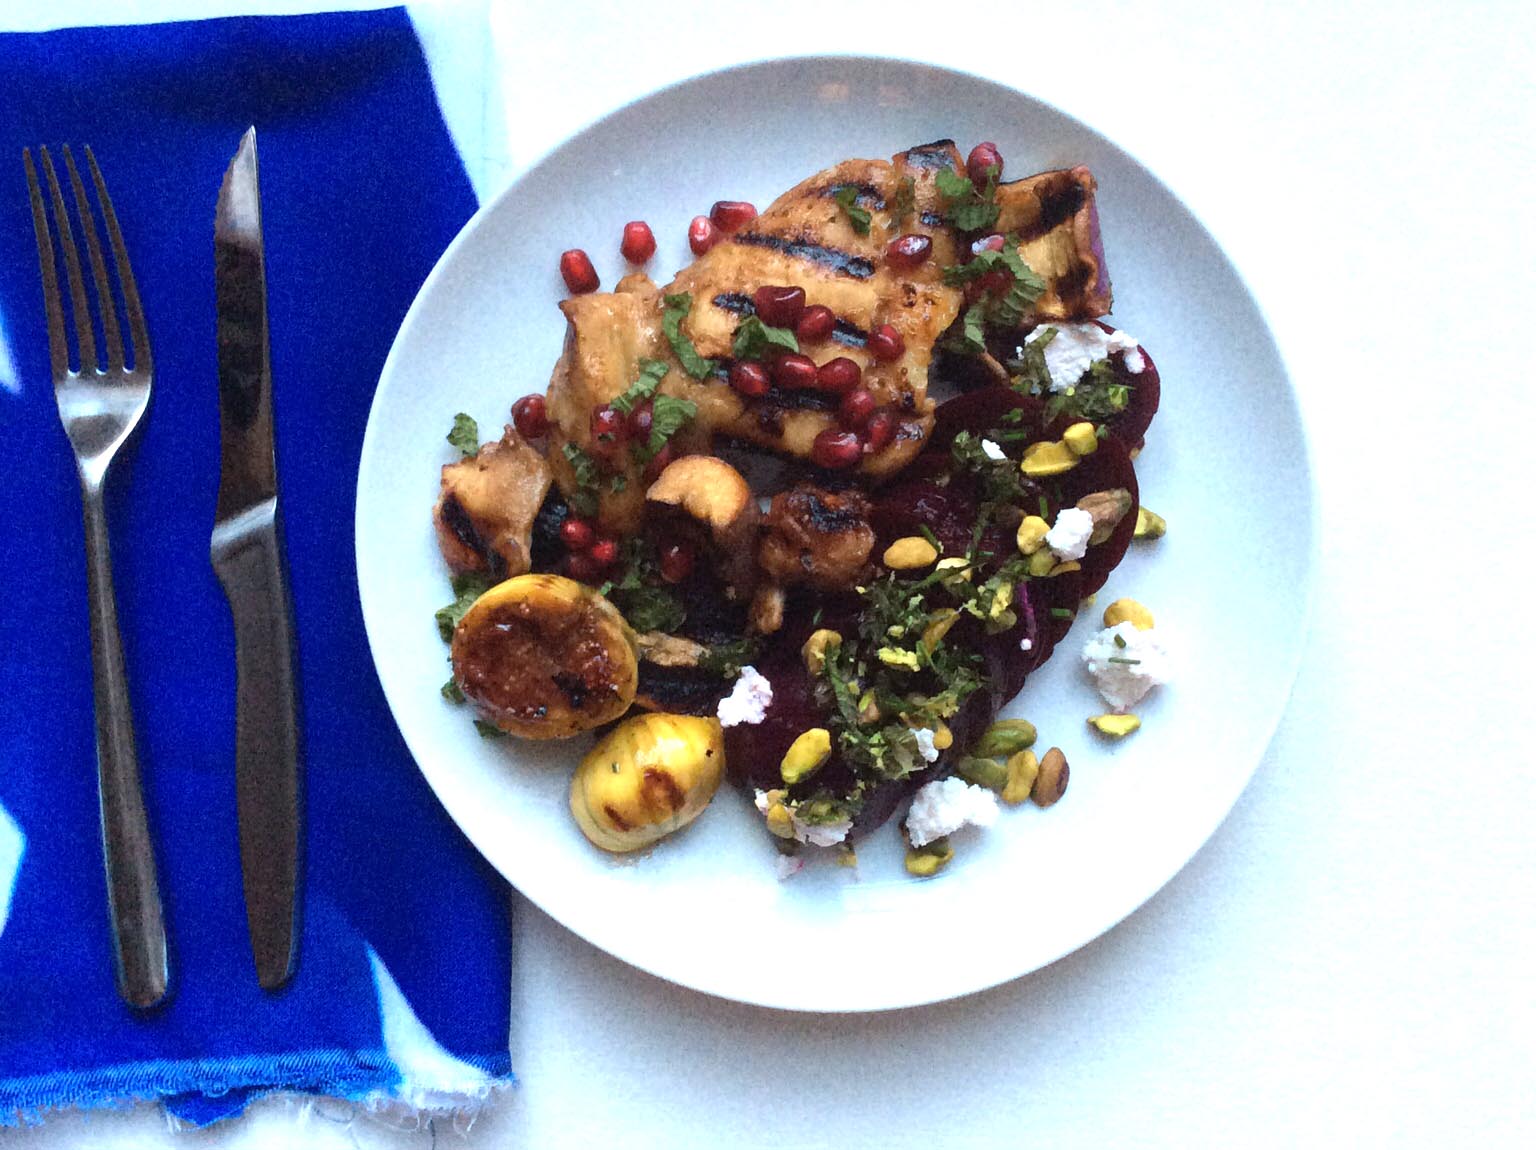 Pomegranate Chicken Eggplant and Figs